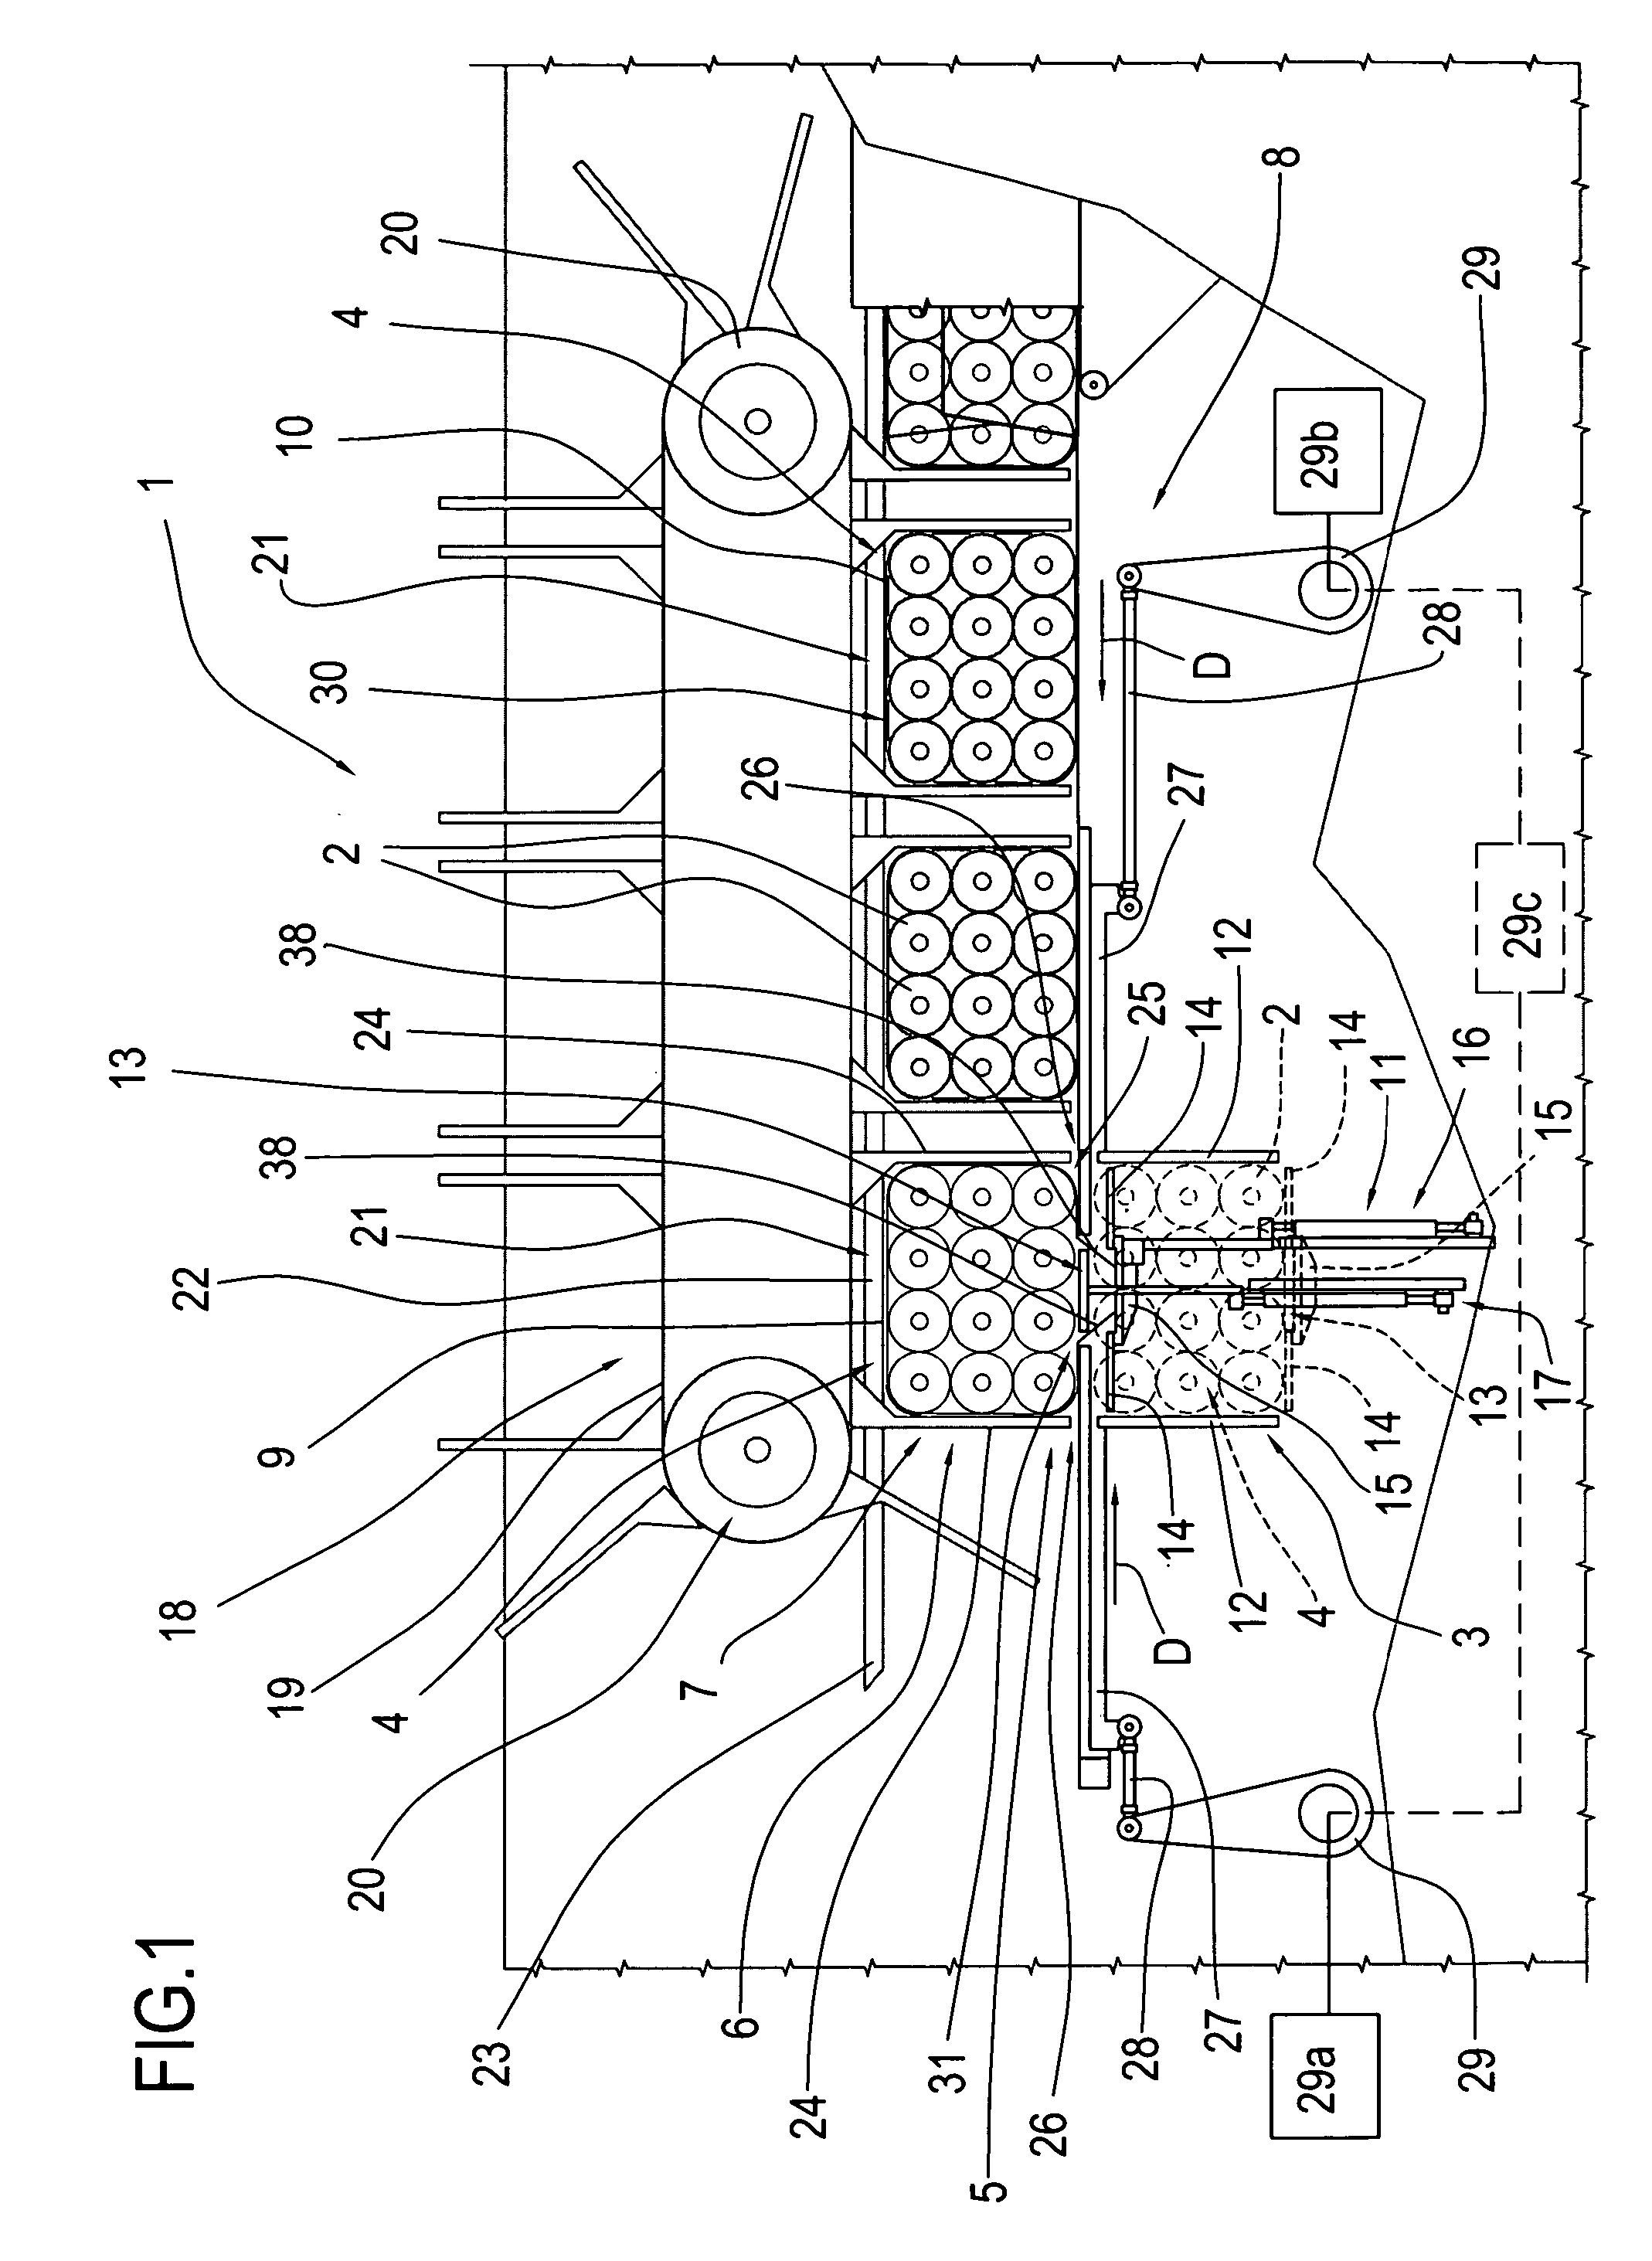 Method and system for packaging rolls of products